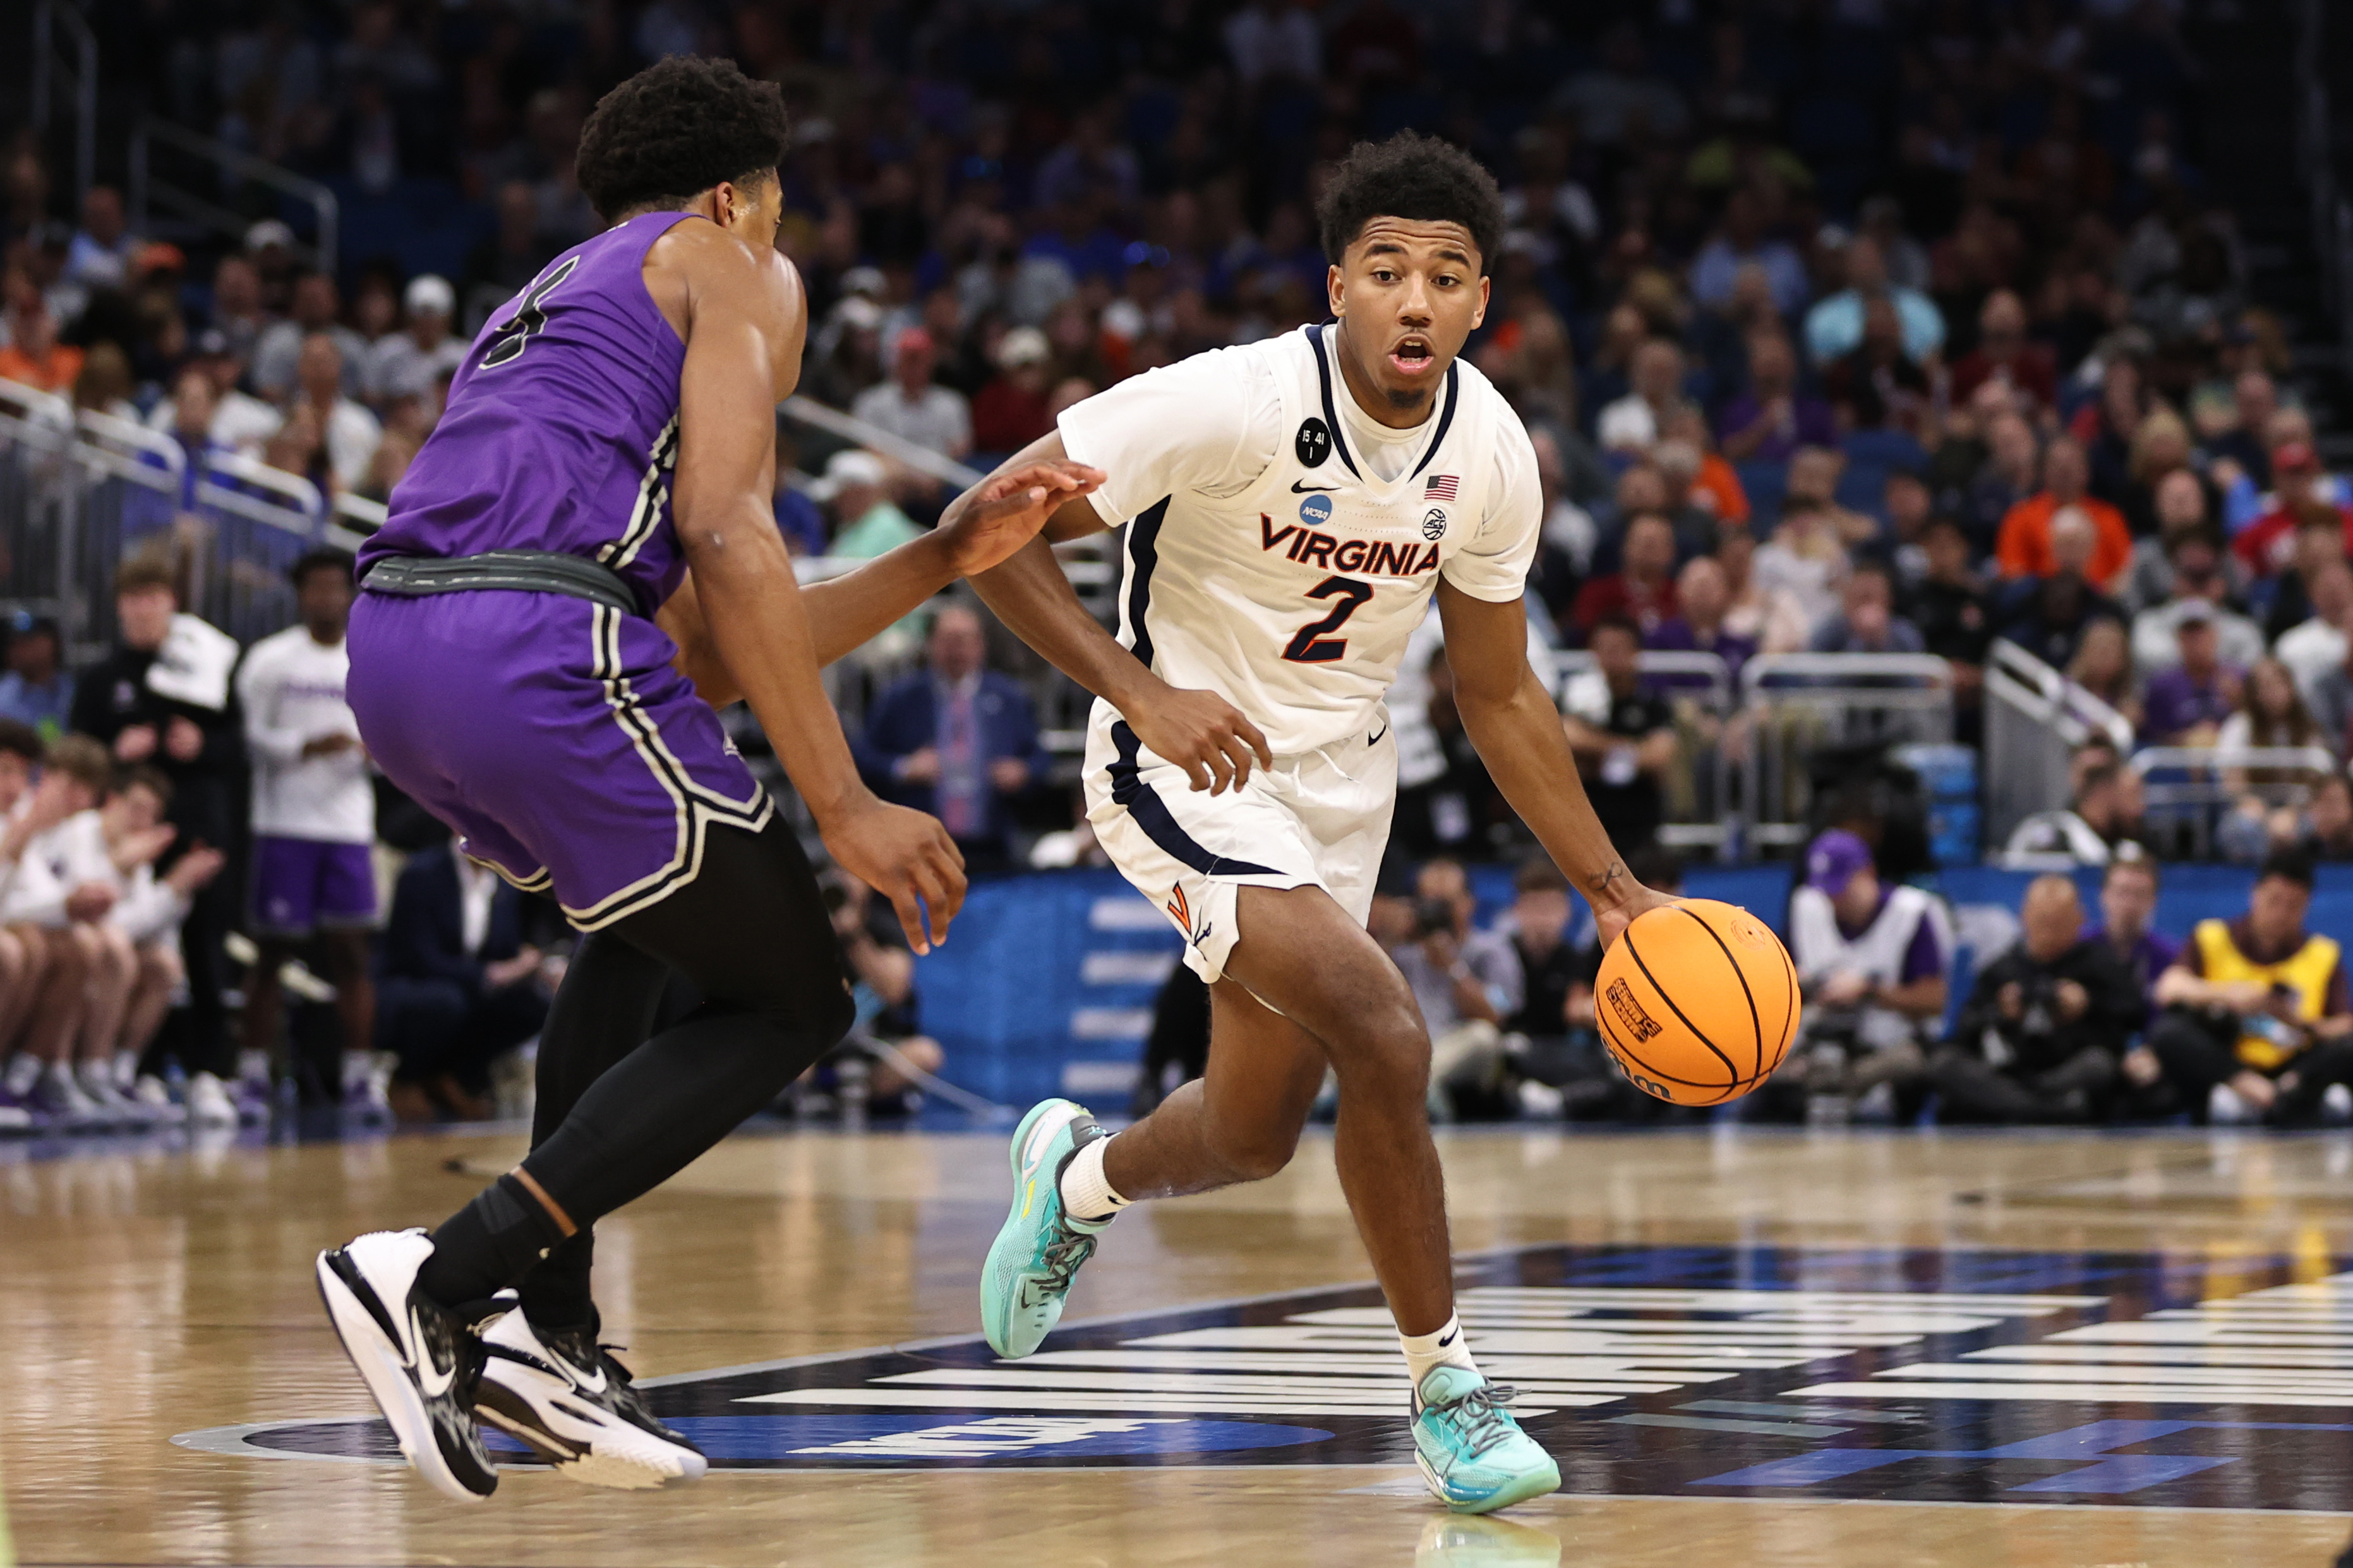 ACC stronger after key players make 11th-hour decisions to spurn NBA Draft